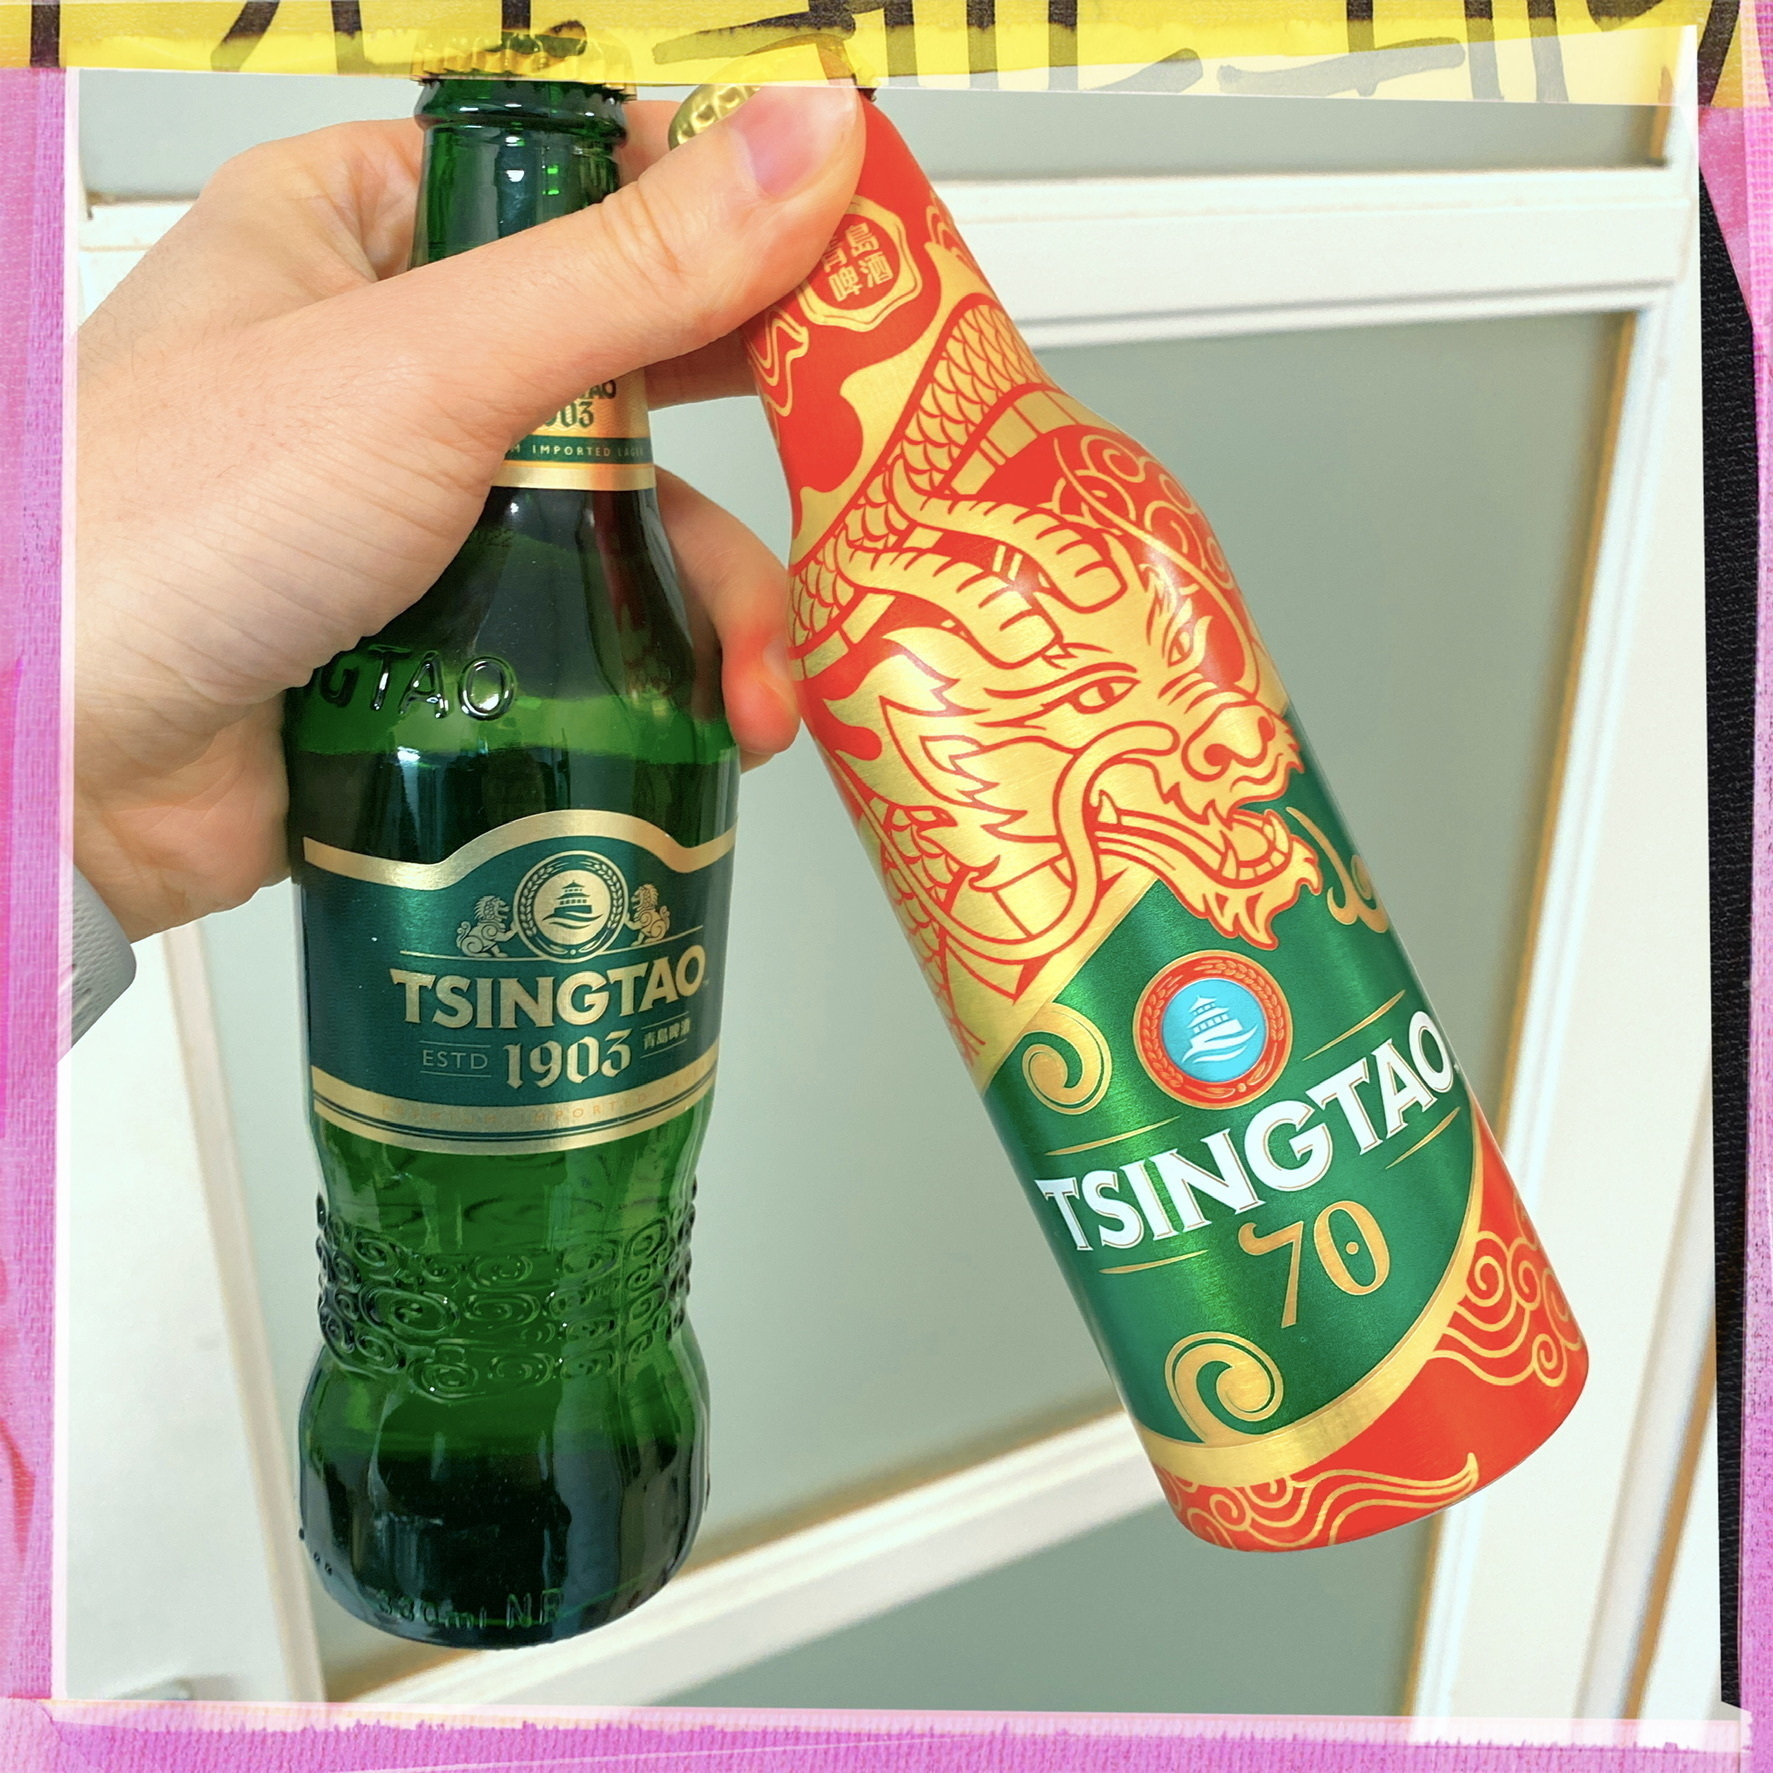 Special Edition Tsing Tao beers